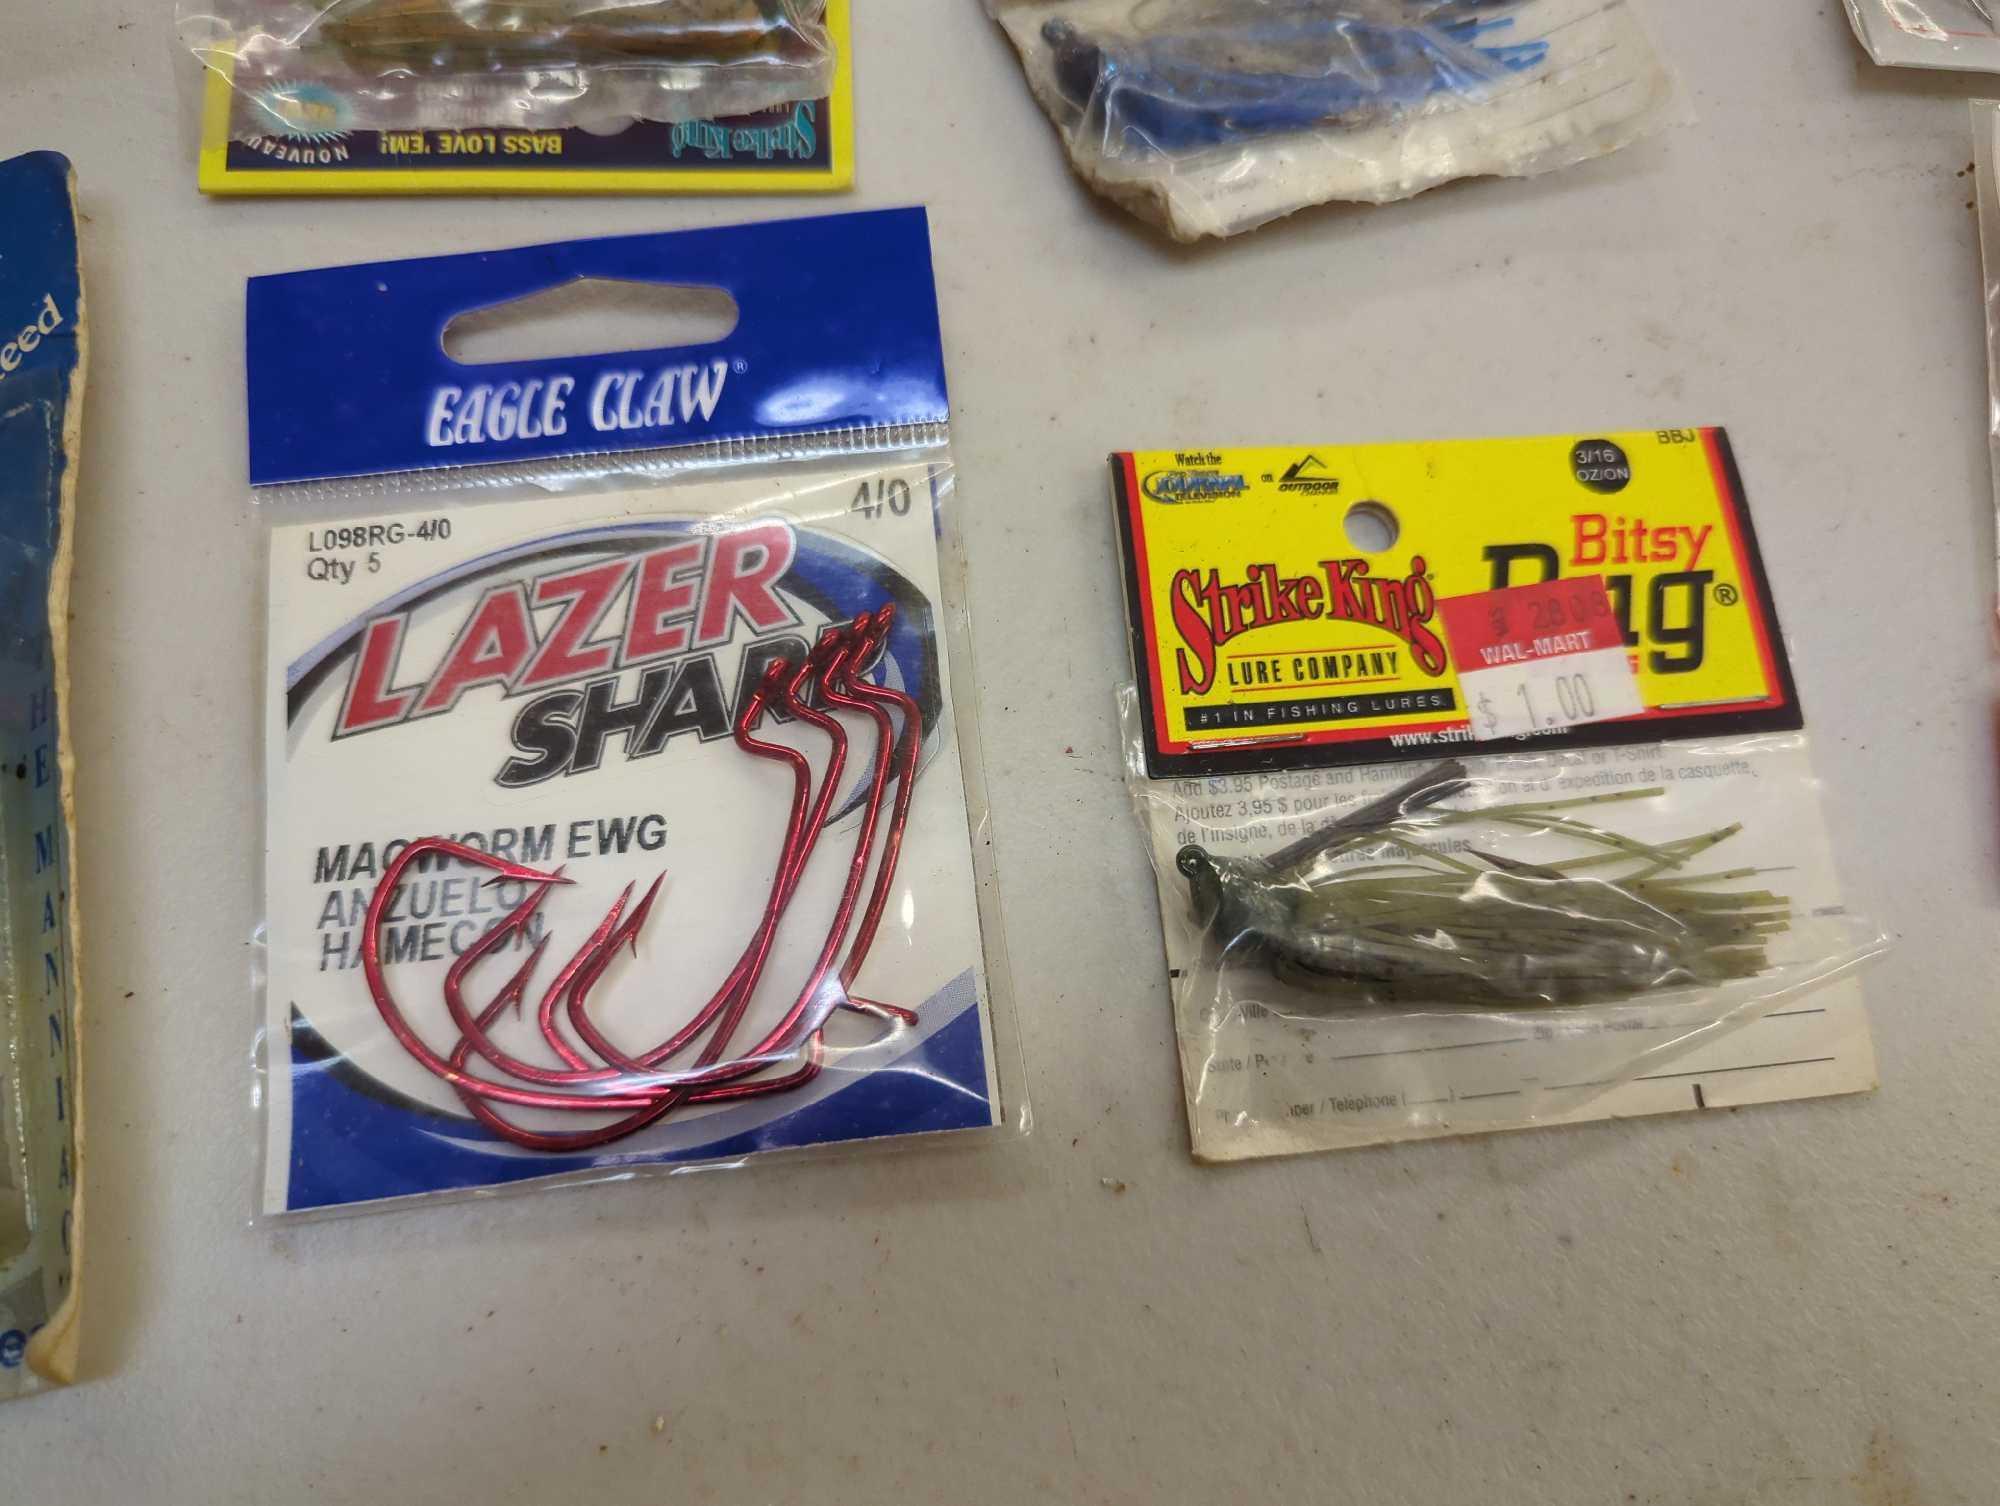 Box and contents including fishing lures and other fishing accessories. Comes as is shown in photos.